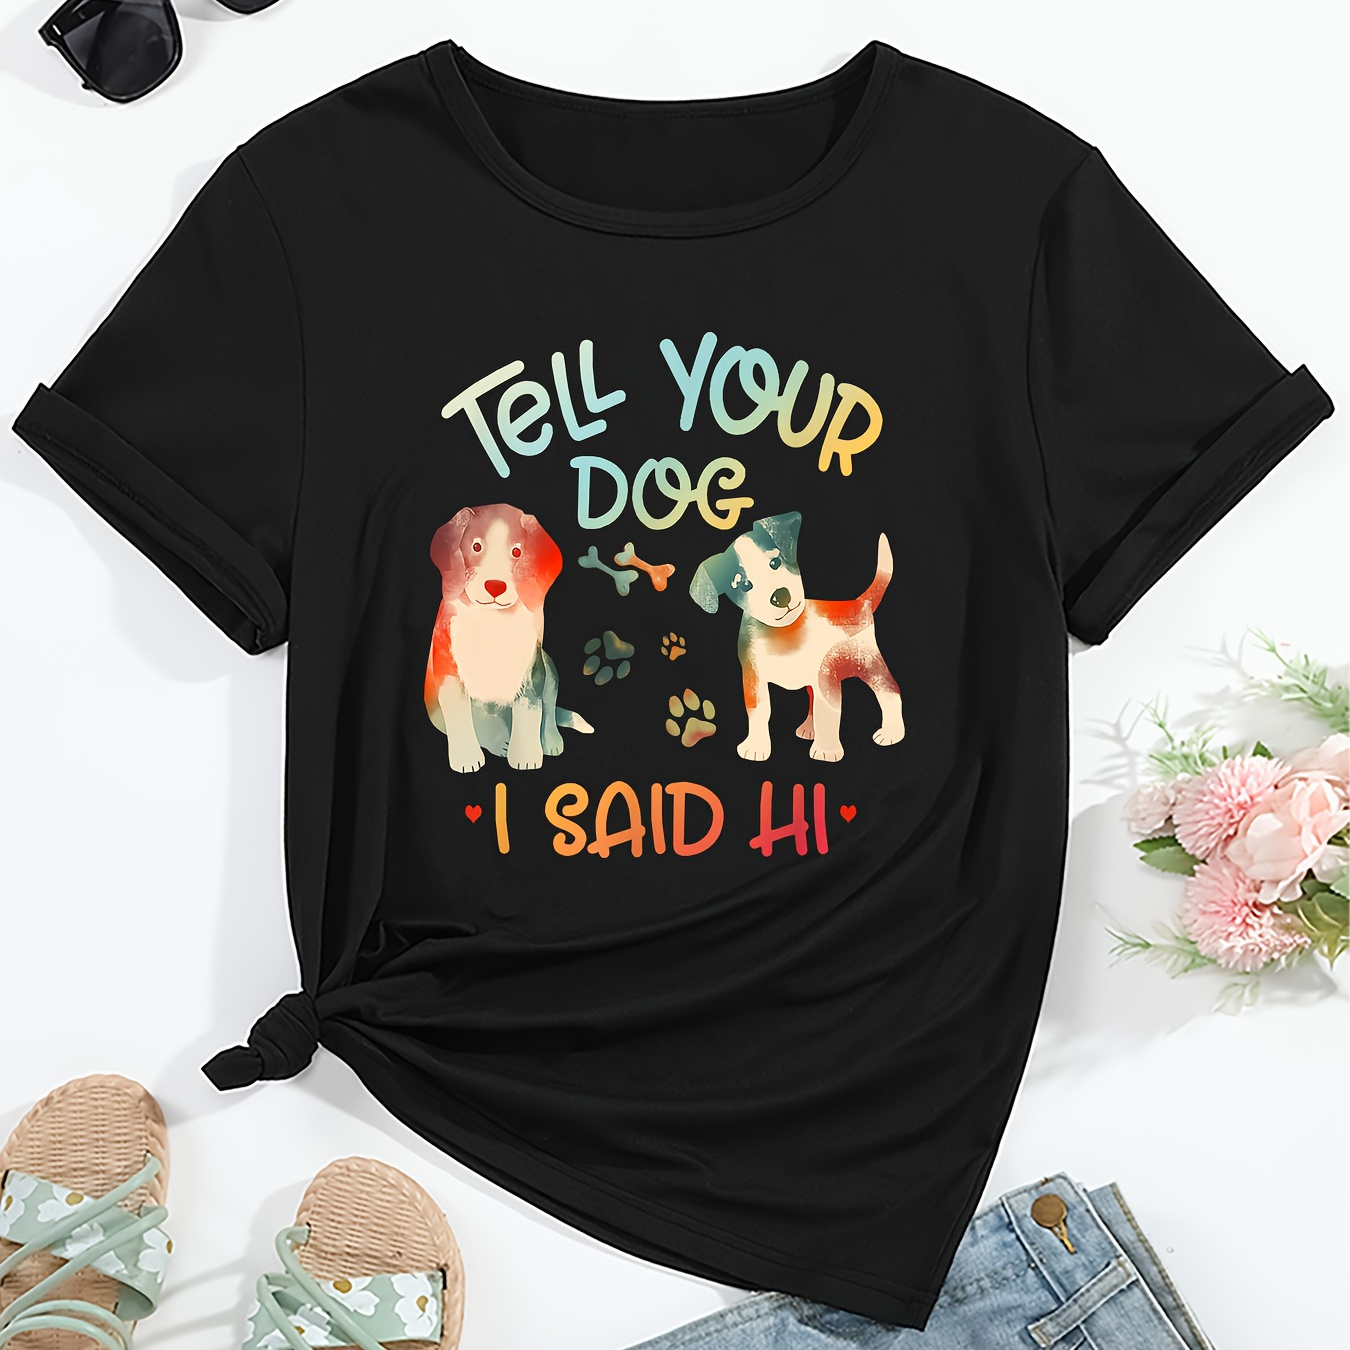 

Women's Cute "tell Your Dog I Said Hi" Graphic Tee, Casual Style, Soft Fabric, Short Sleeve T-shirt With Dog Print Design